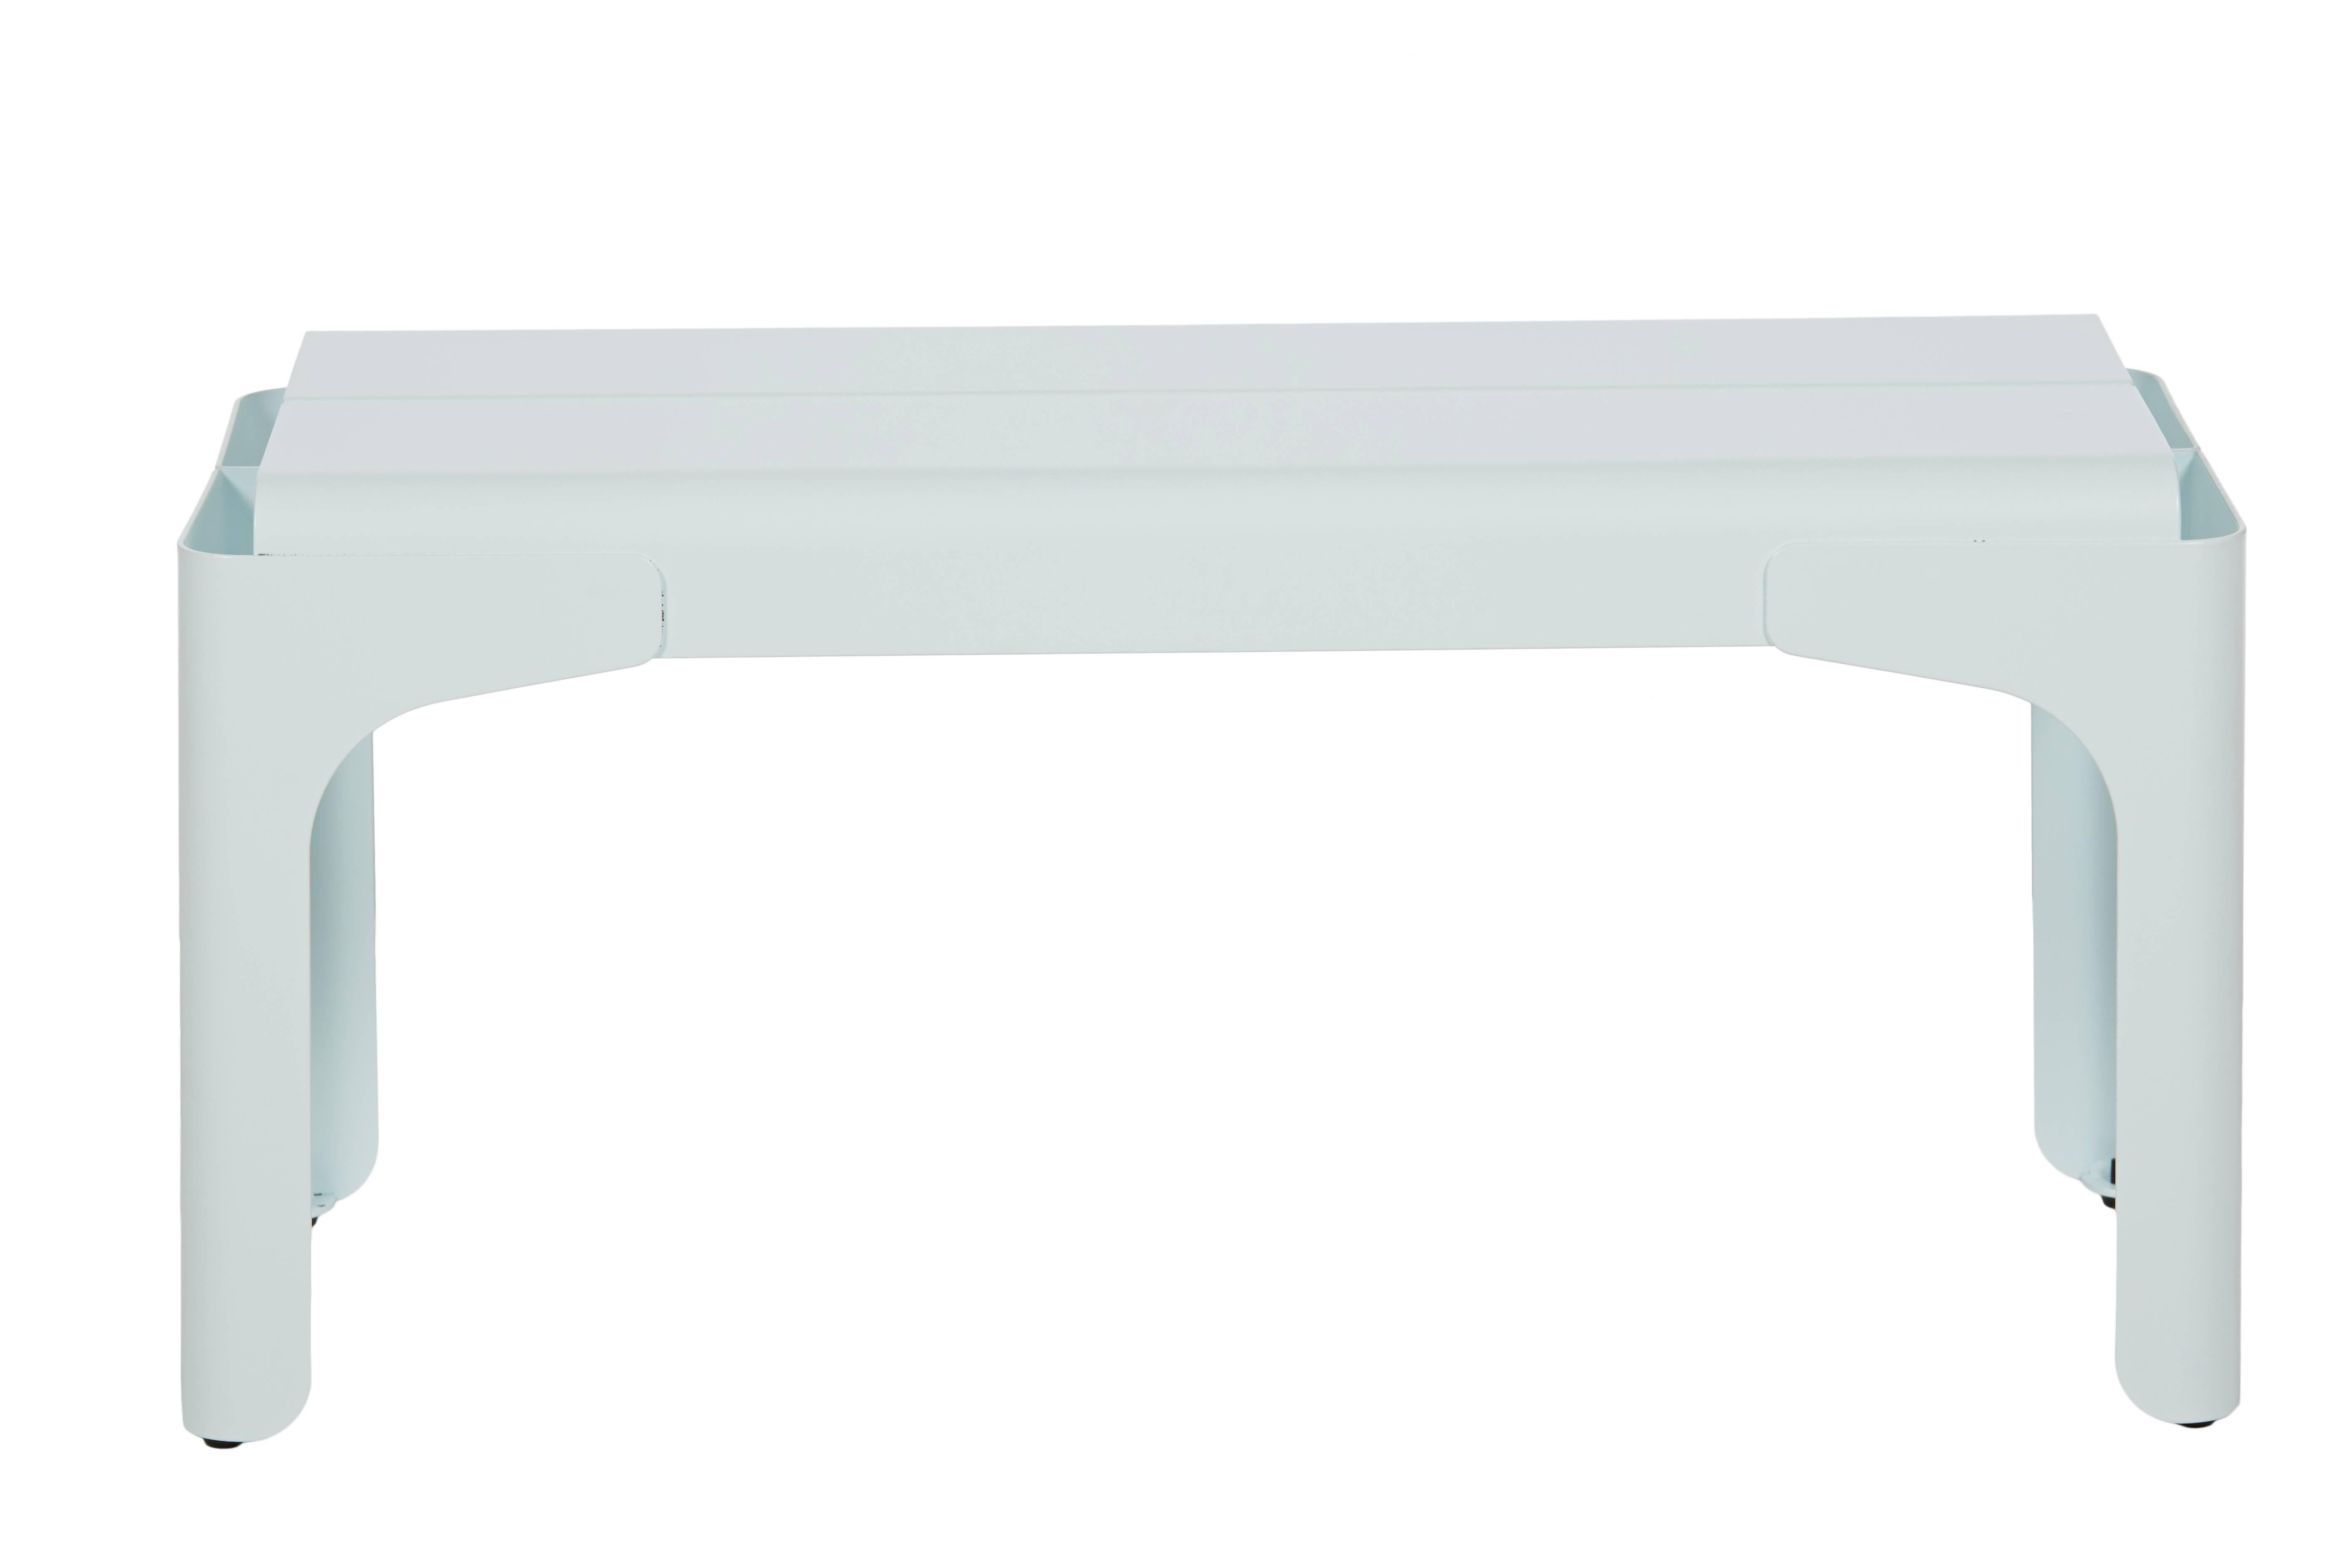 The perfect partner to the Rhino desk, the little crocodile bench, designed by Normal Studio, shows all of Tolix’s expertise and experience in folding metal. Its pure and rounded contours ensure a child’s comfort. Extremely solid, it can be passed